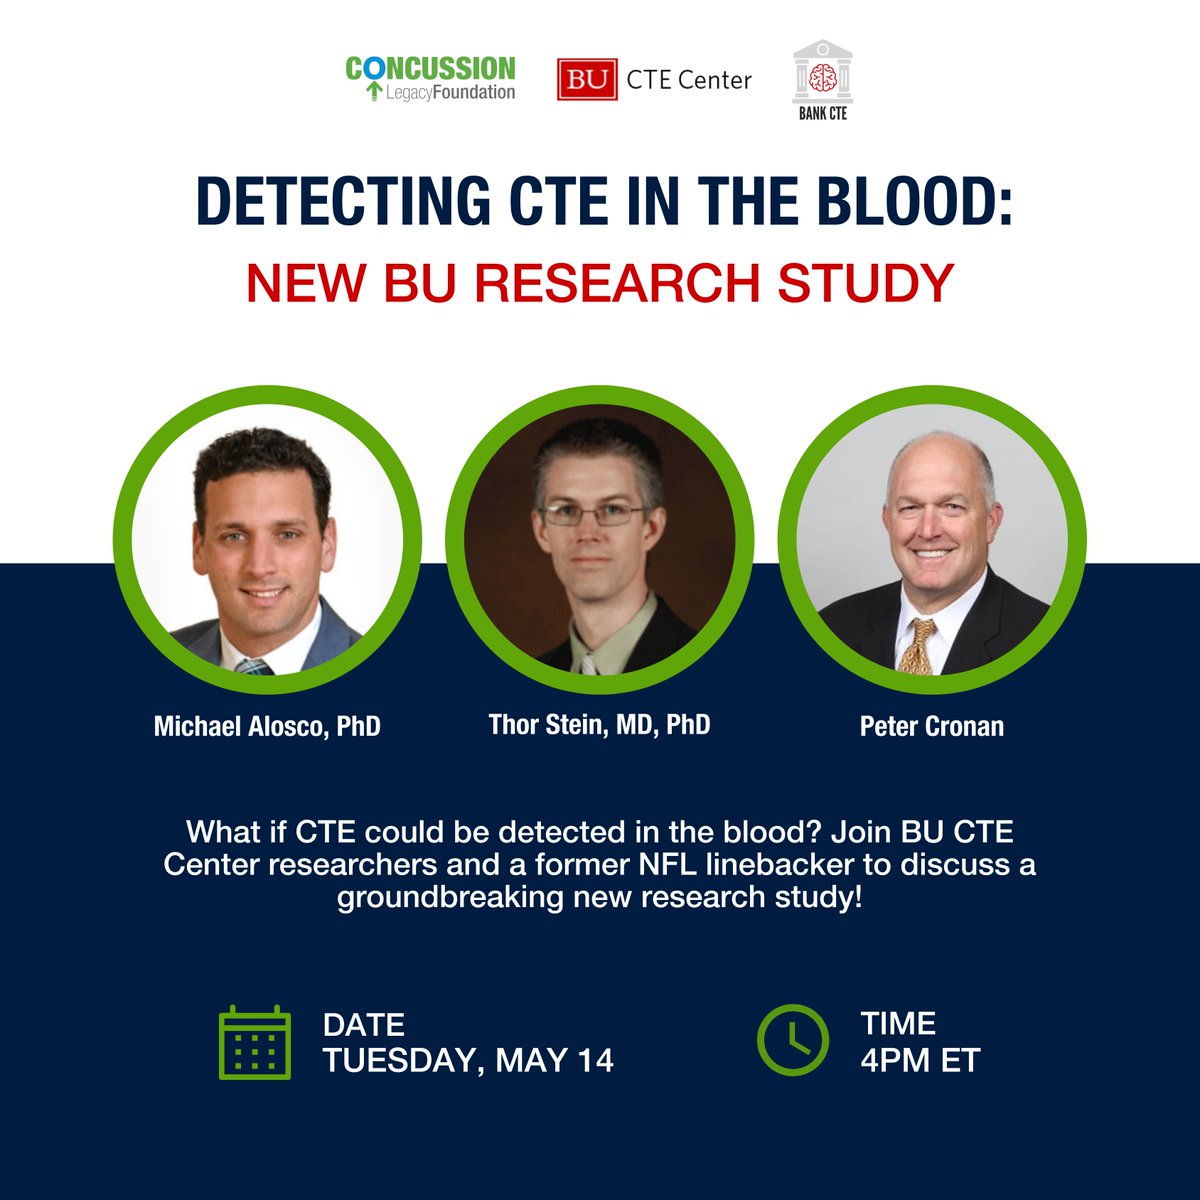 Join CLF and @bu_cte Tuesday afternoon as we launch BANK CTE, a groundbreaking study aiming to detect CTE through blood biomarkers. Register for our webinar hosted by CLF CEO @ChrisNowinski1, 'Detecting CTE in the Blood' us02web.zoom.us/webinar/regist…